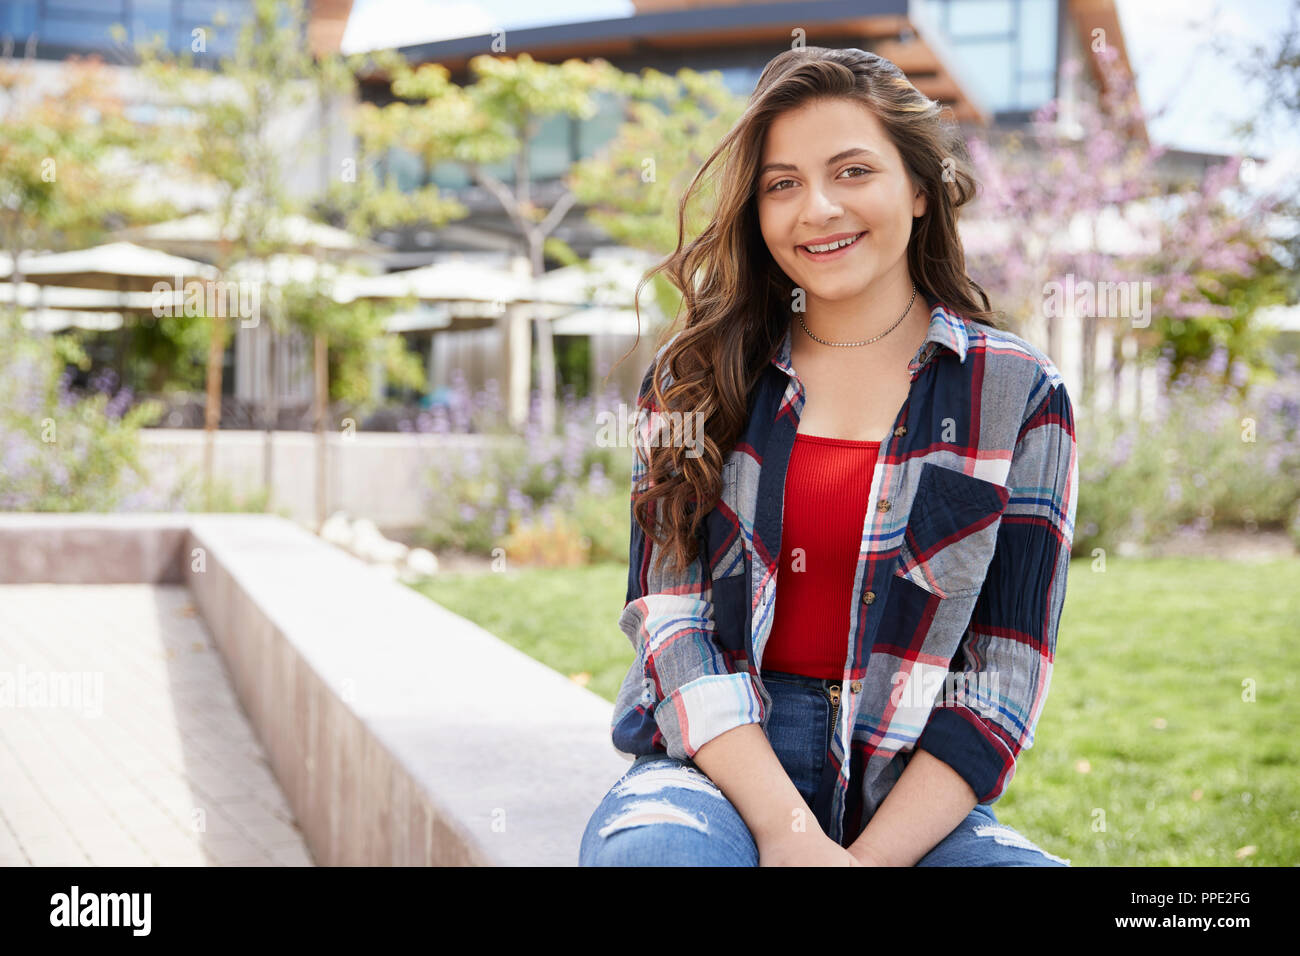 Portrait Of Female High School Student Sitting On Wall Outside College Buildings Stock Photo